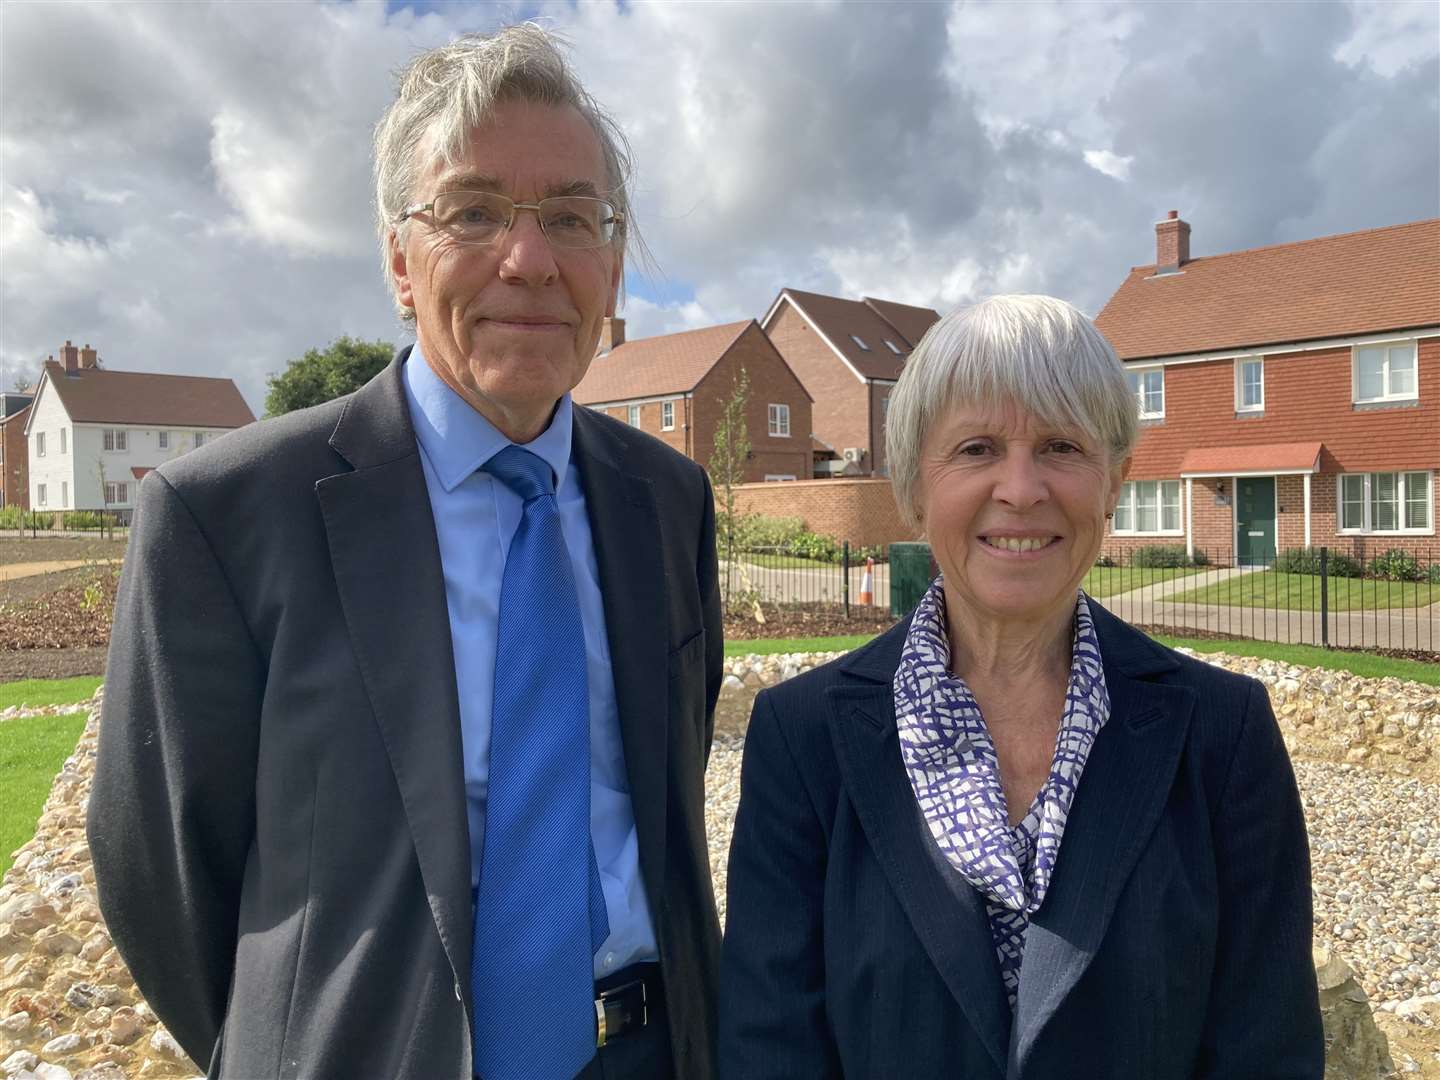 Richard Thompstone and Sue Flipping of the Newington History Group were behind the recreation of the 2,000-year-old Romano-British temple discovered at Newington near Sittingbourne